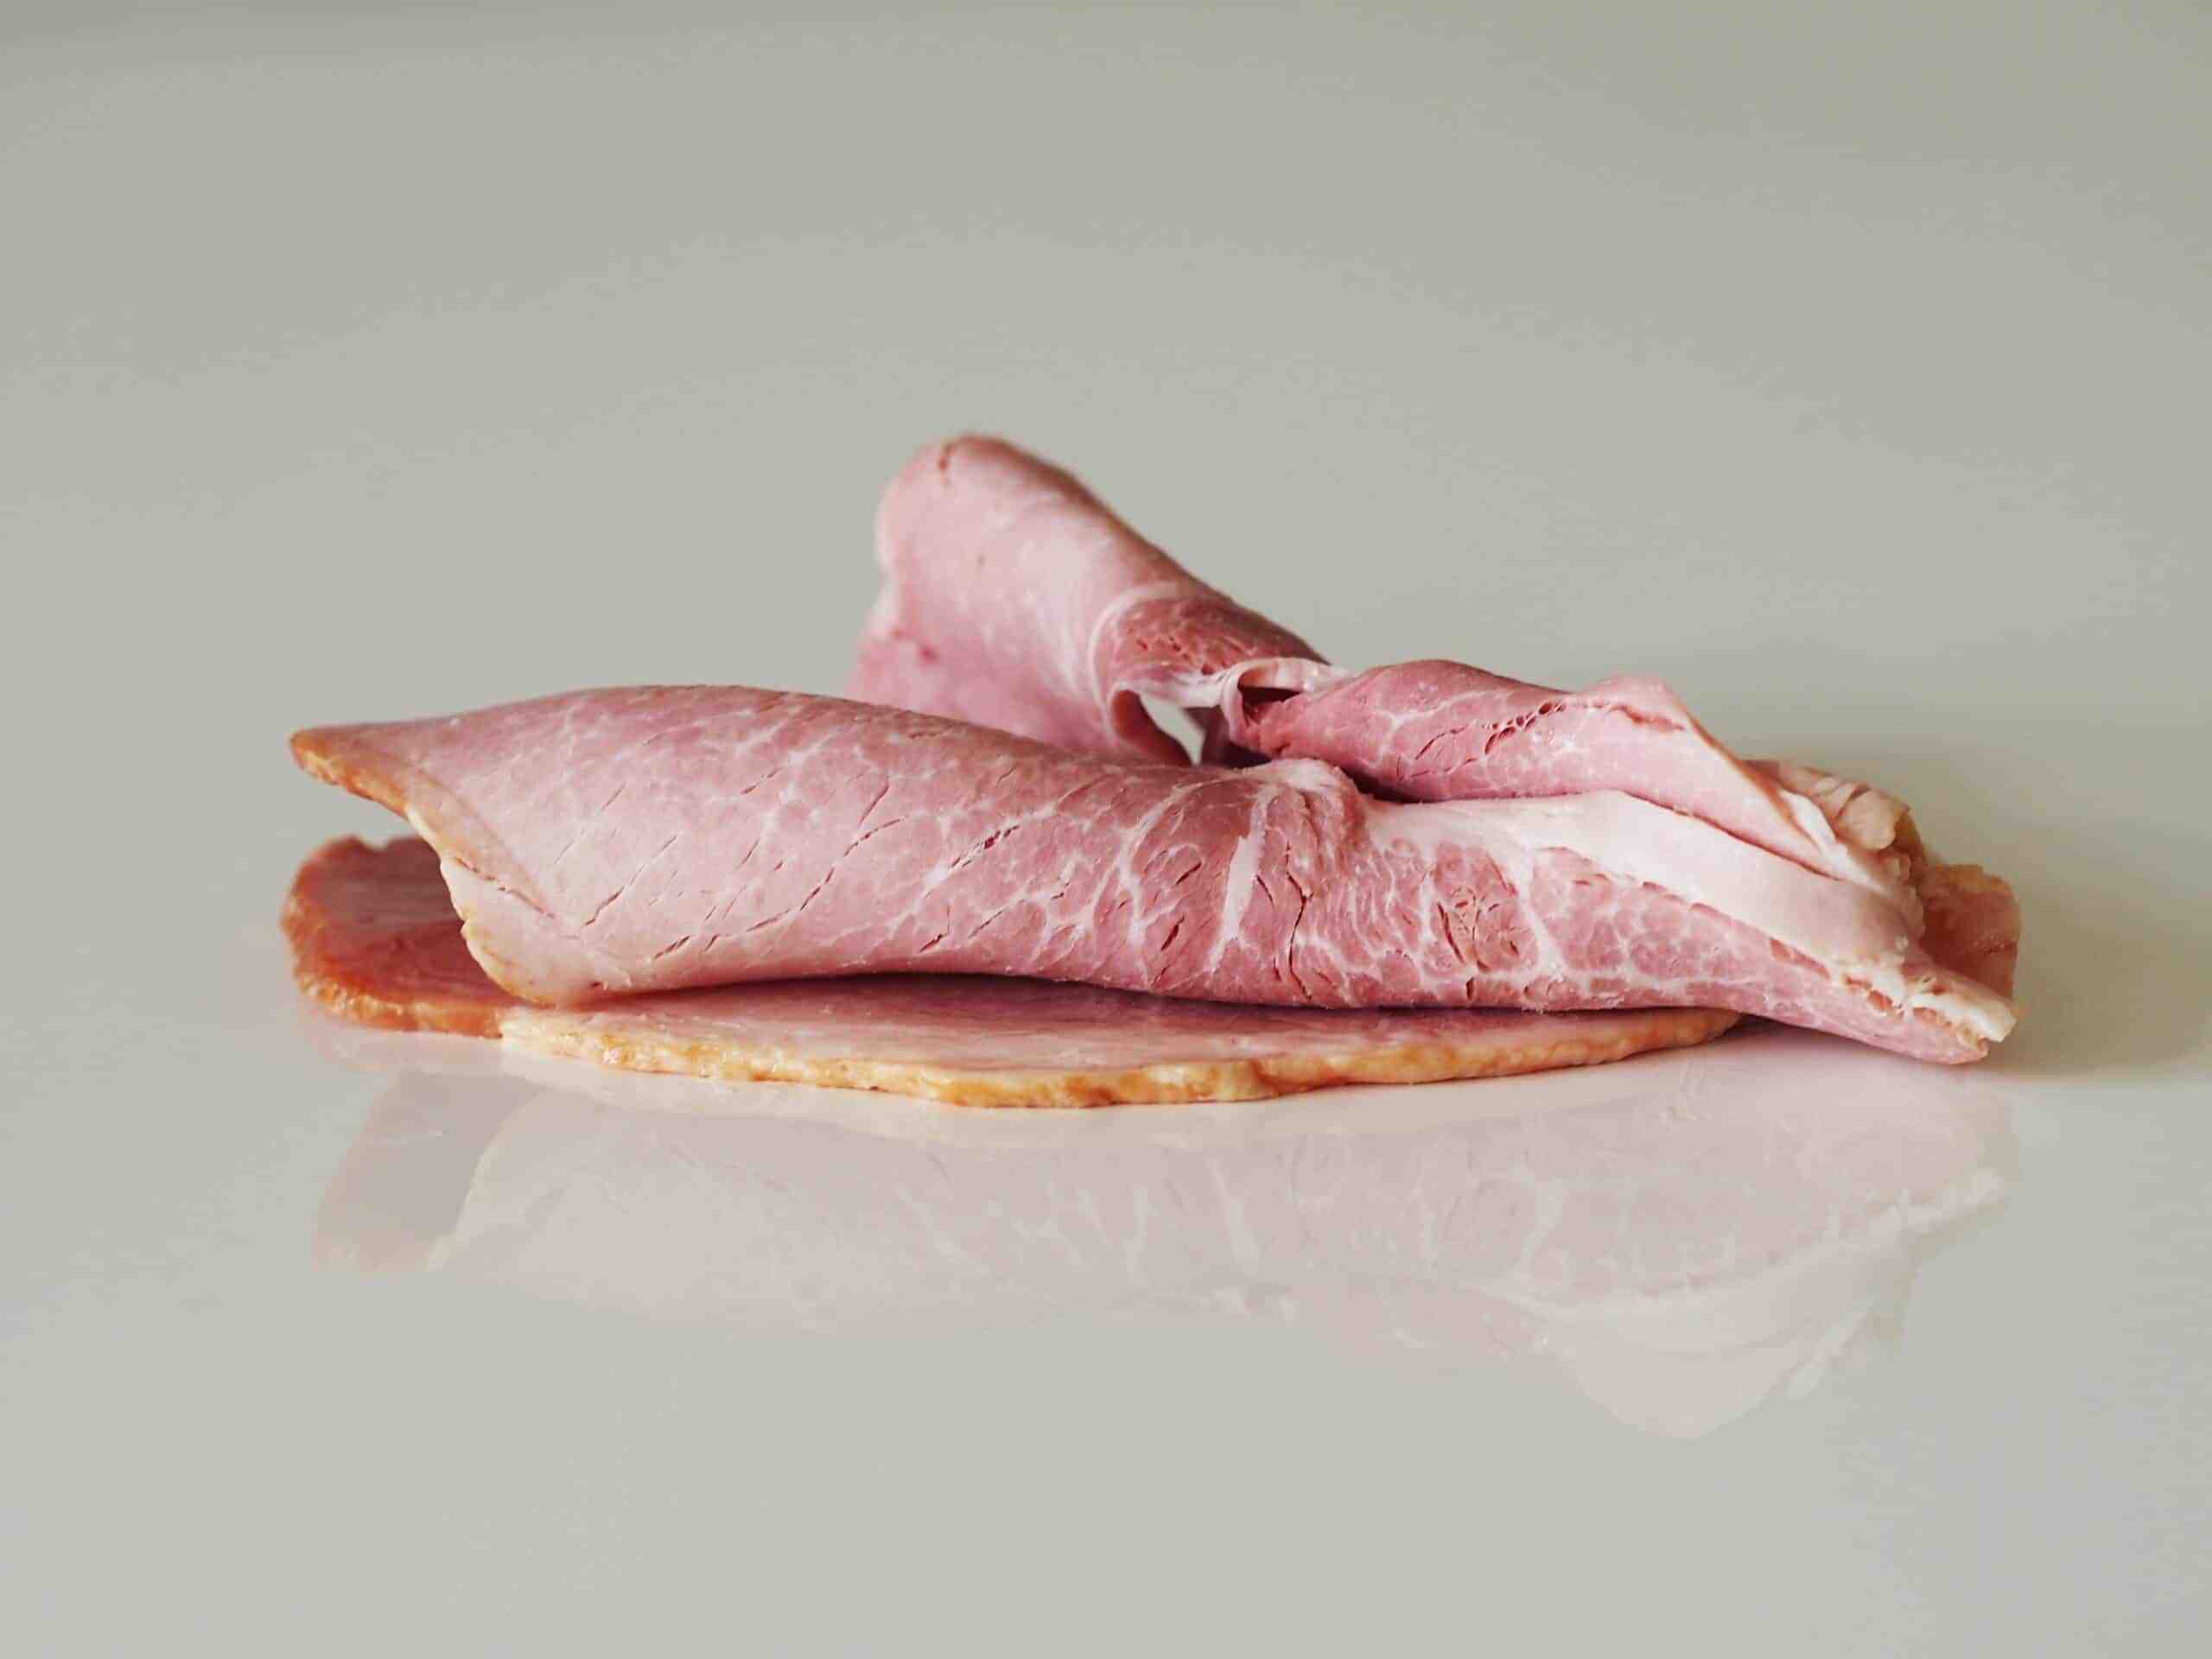 Is smoked ham healthy?